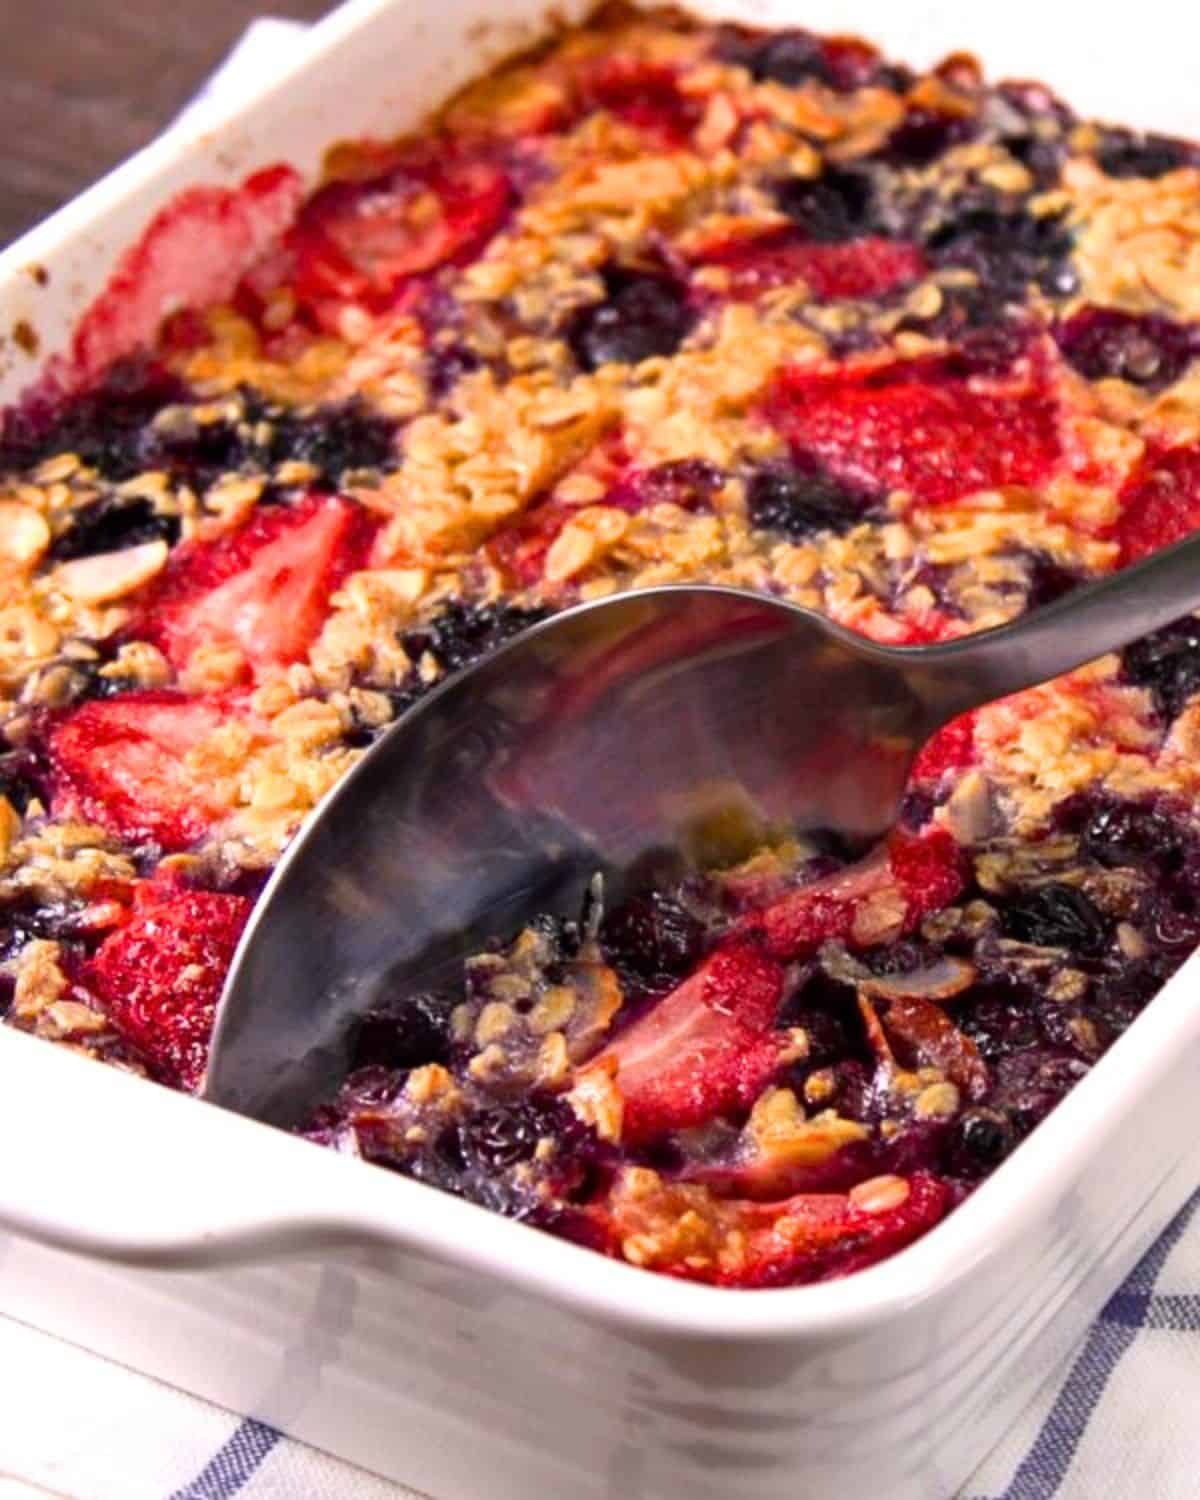 Baked oatmeal in casserole dish with serving spoon.